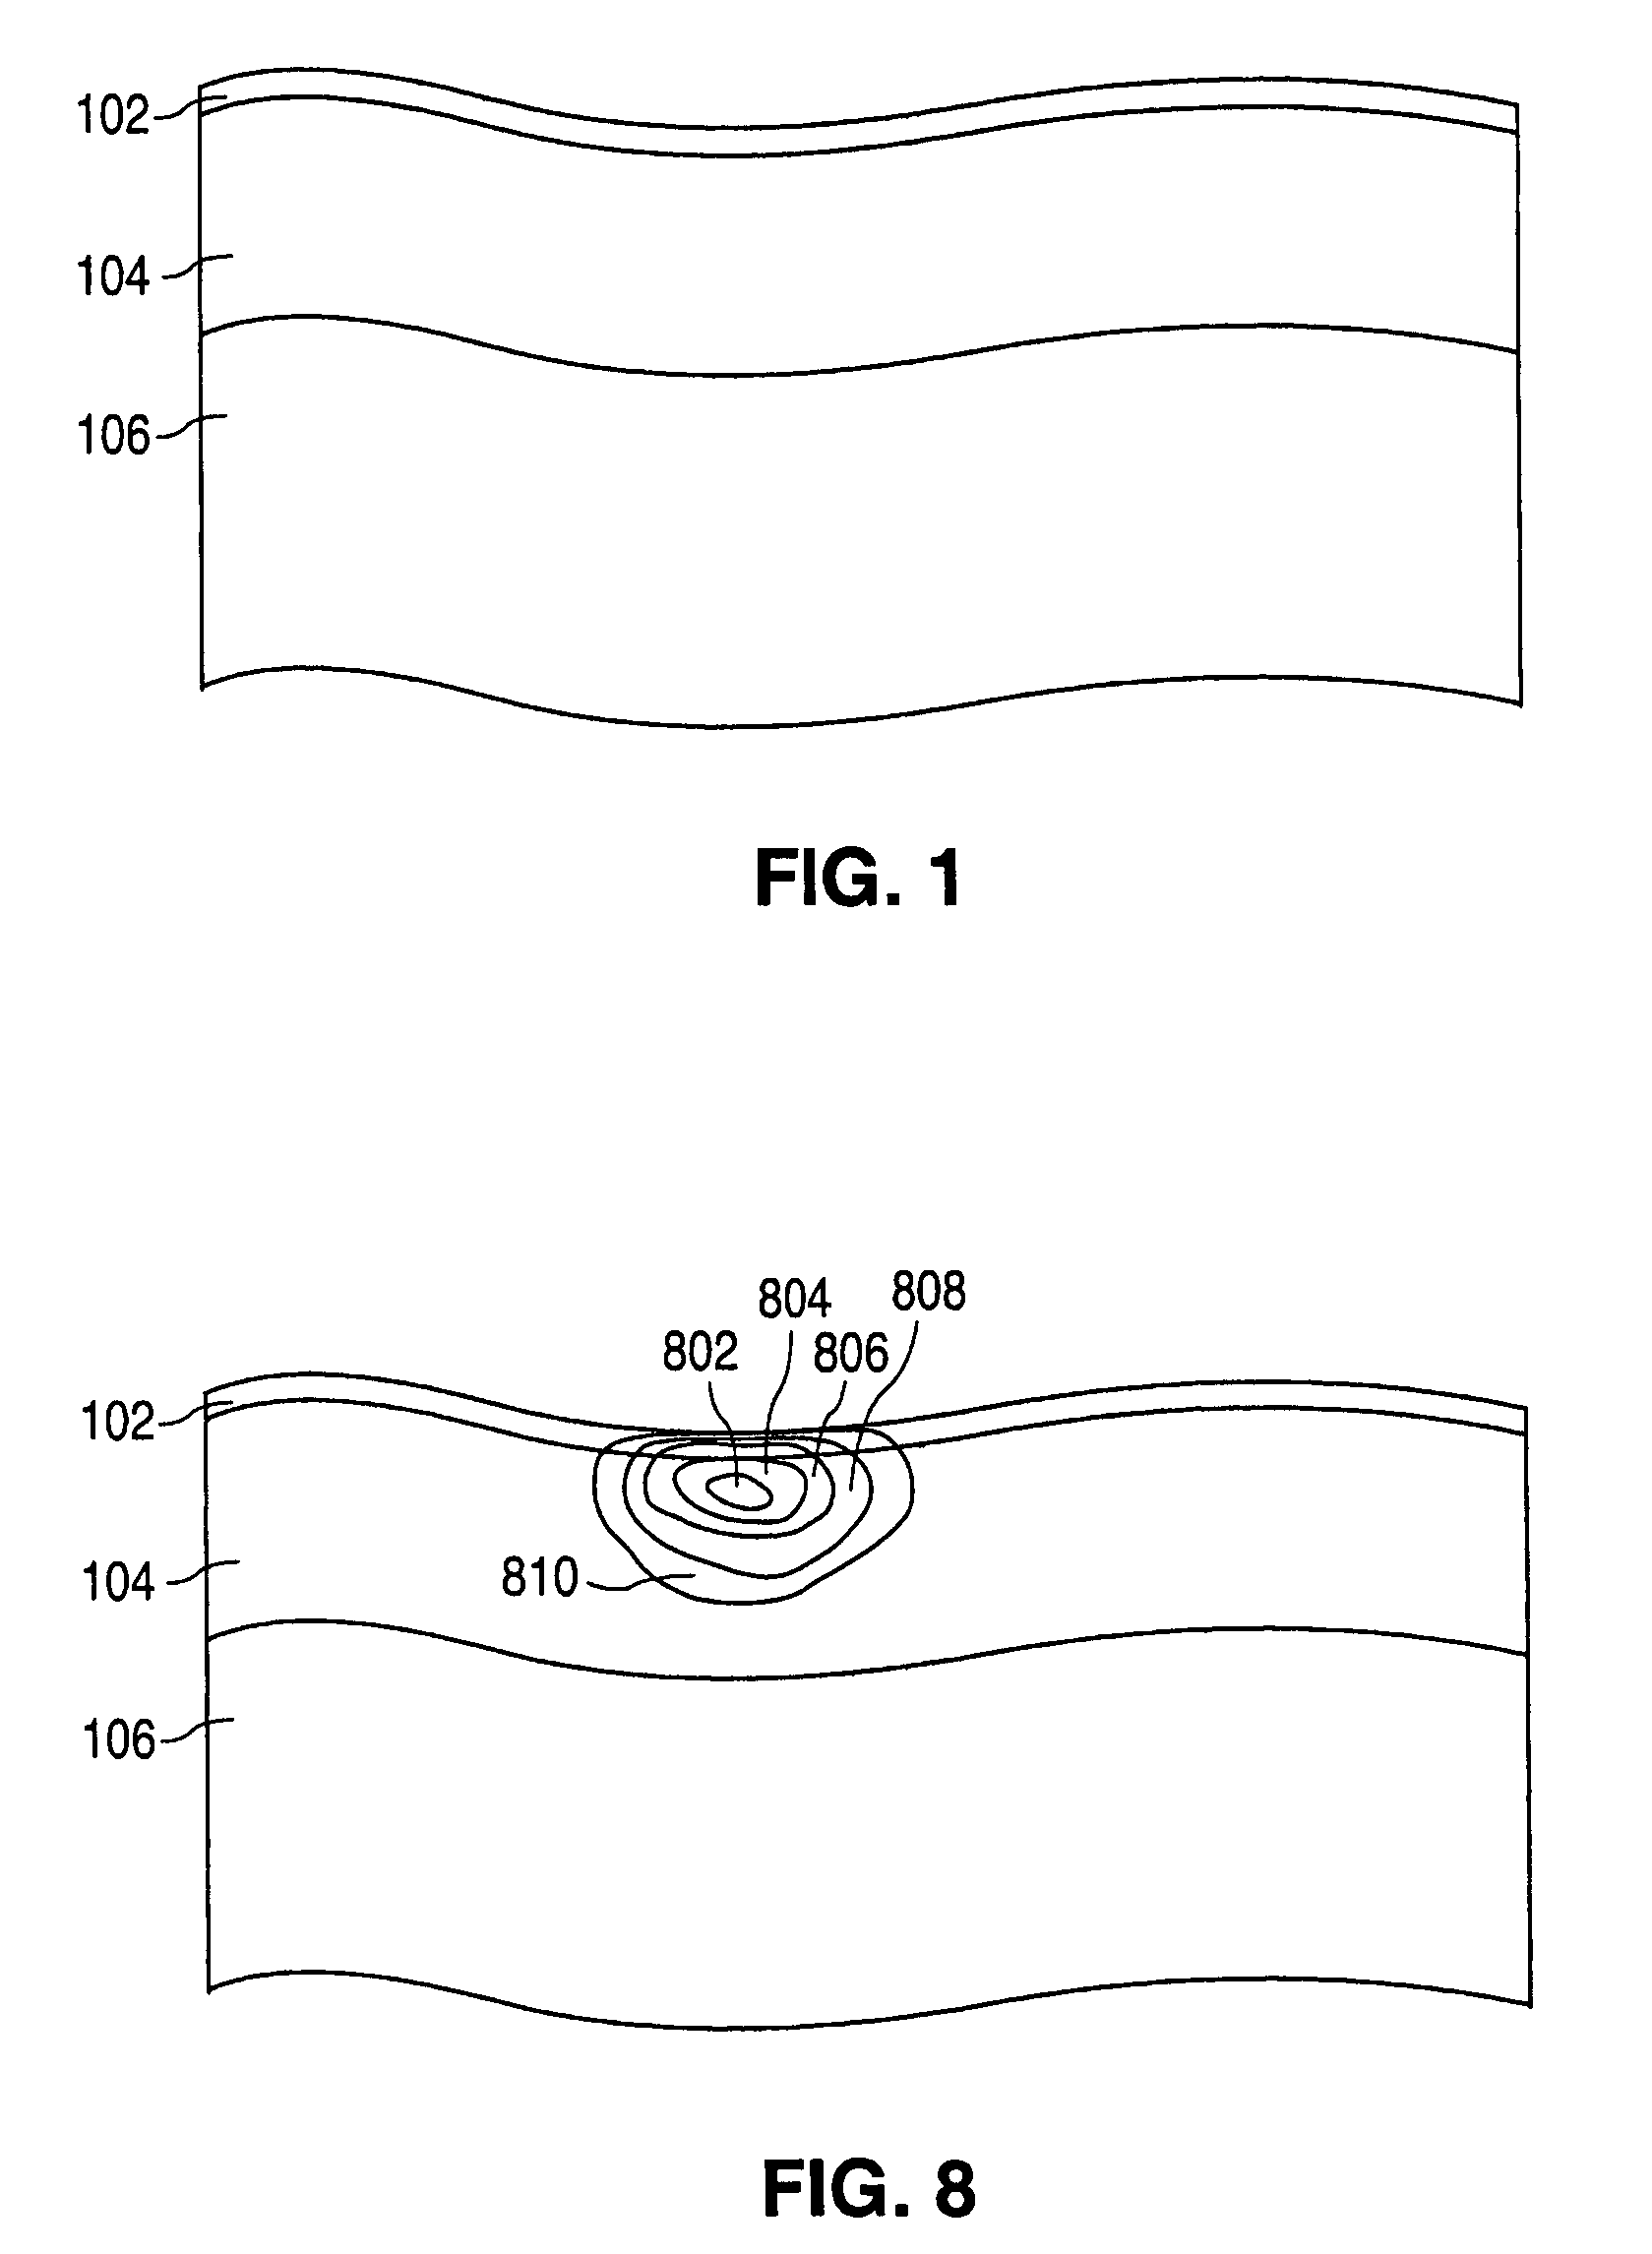 Method for treatment of post-partum abdominal skin redundancy or laxity